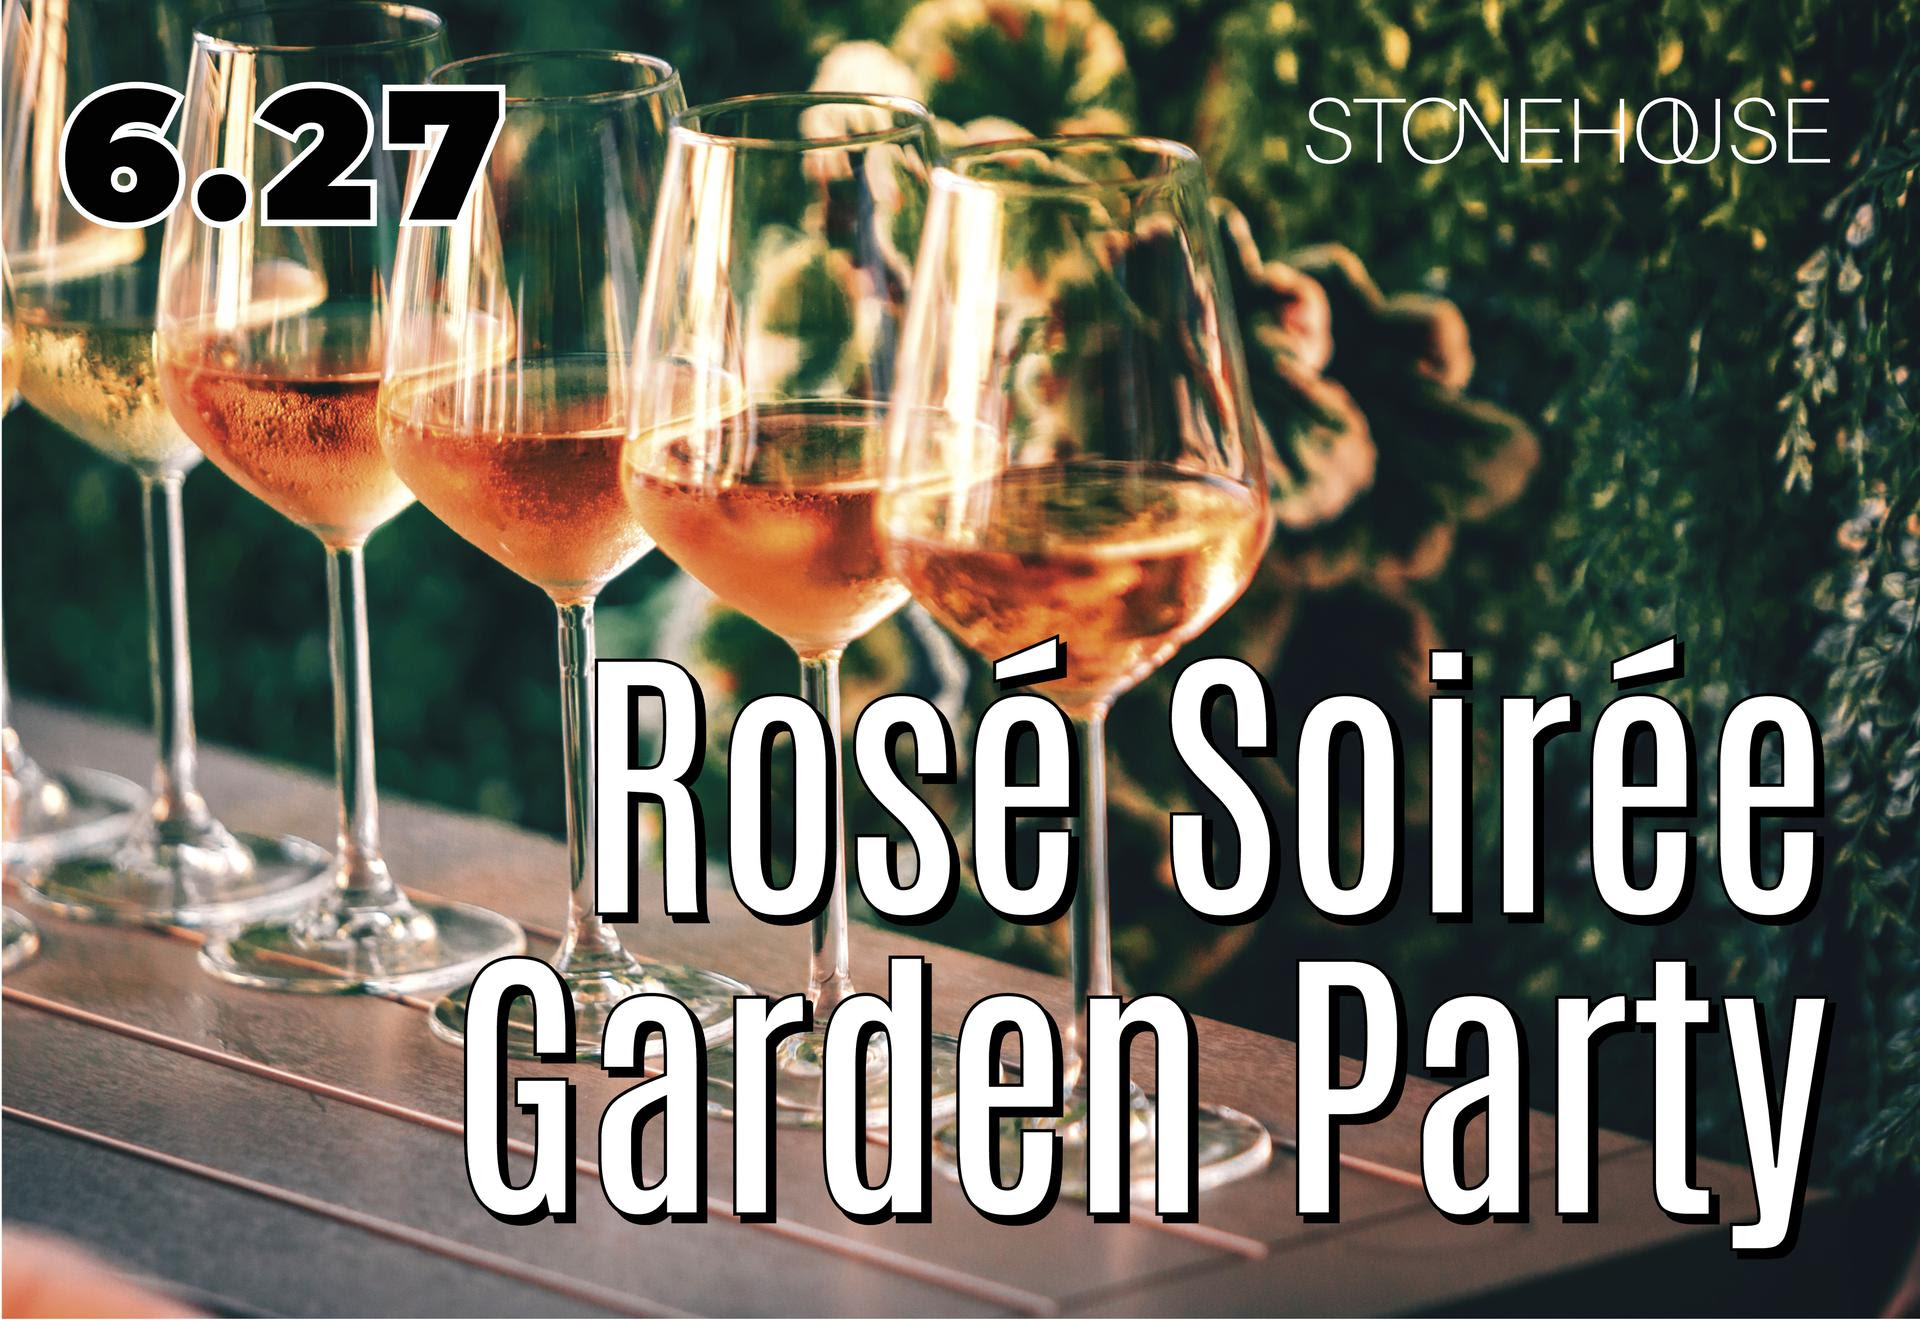 rose-soriee-stone-house